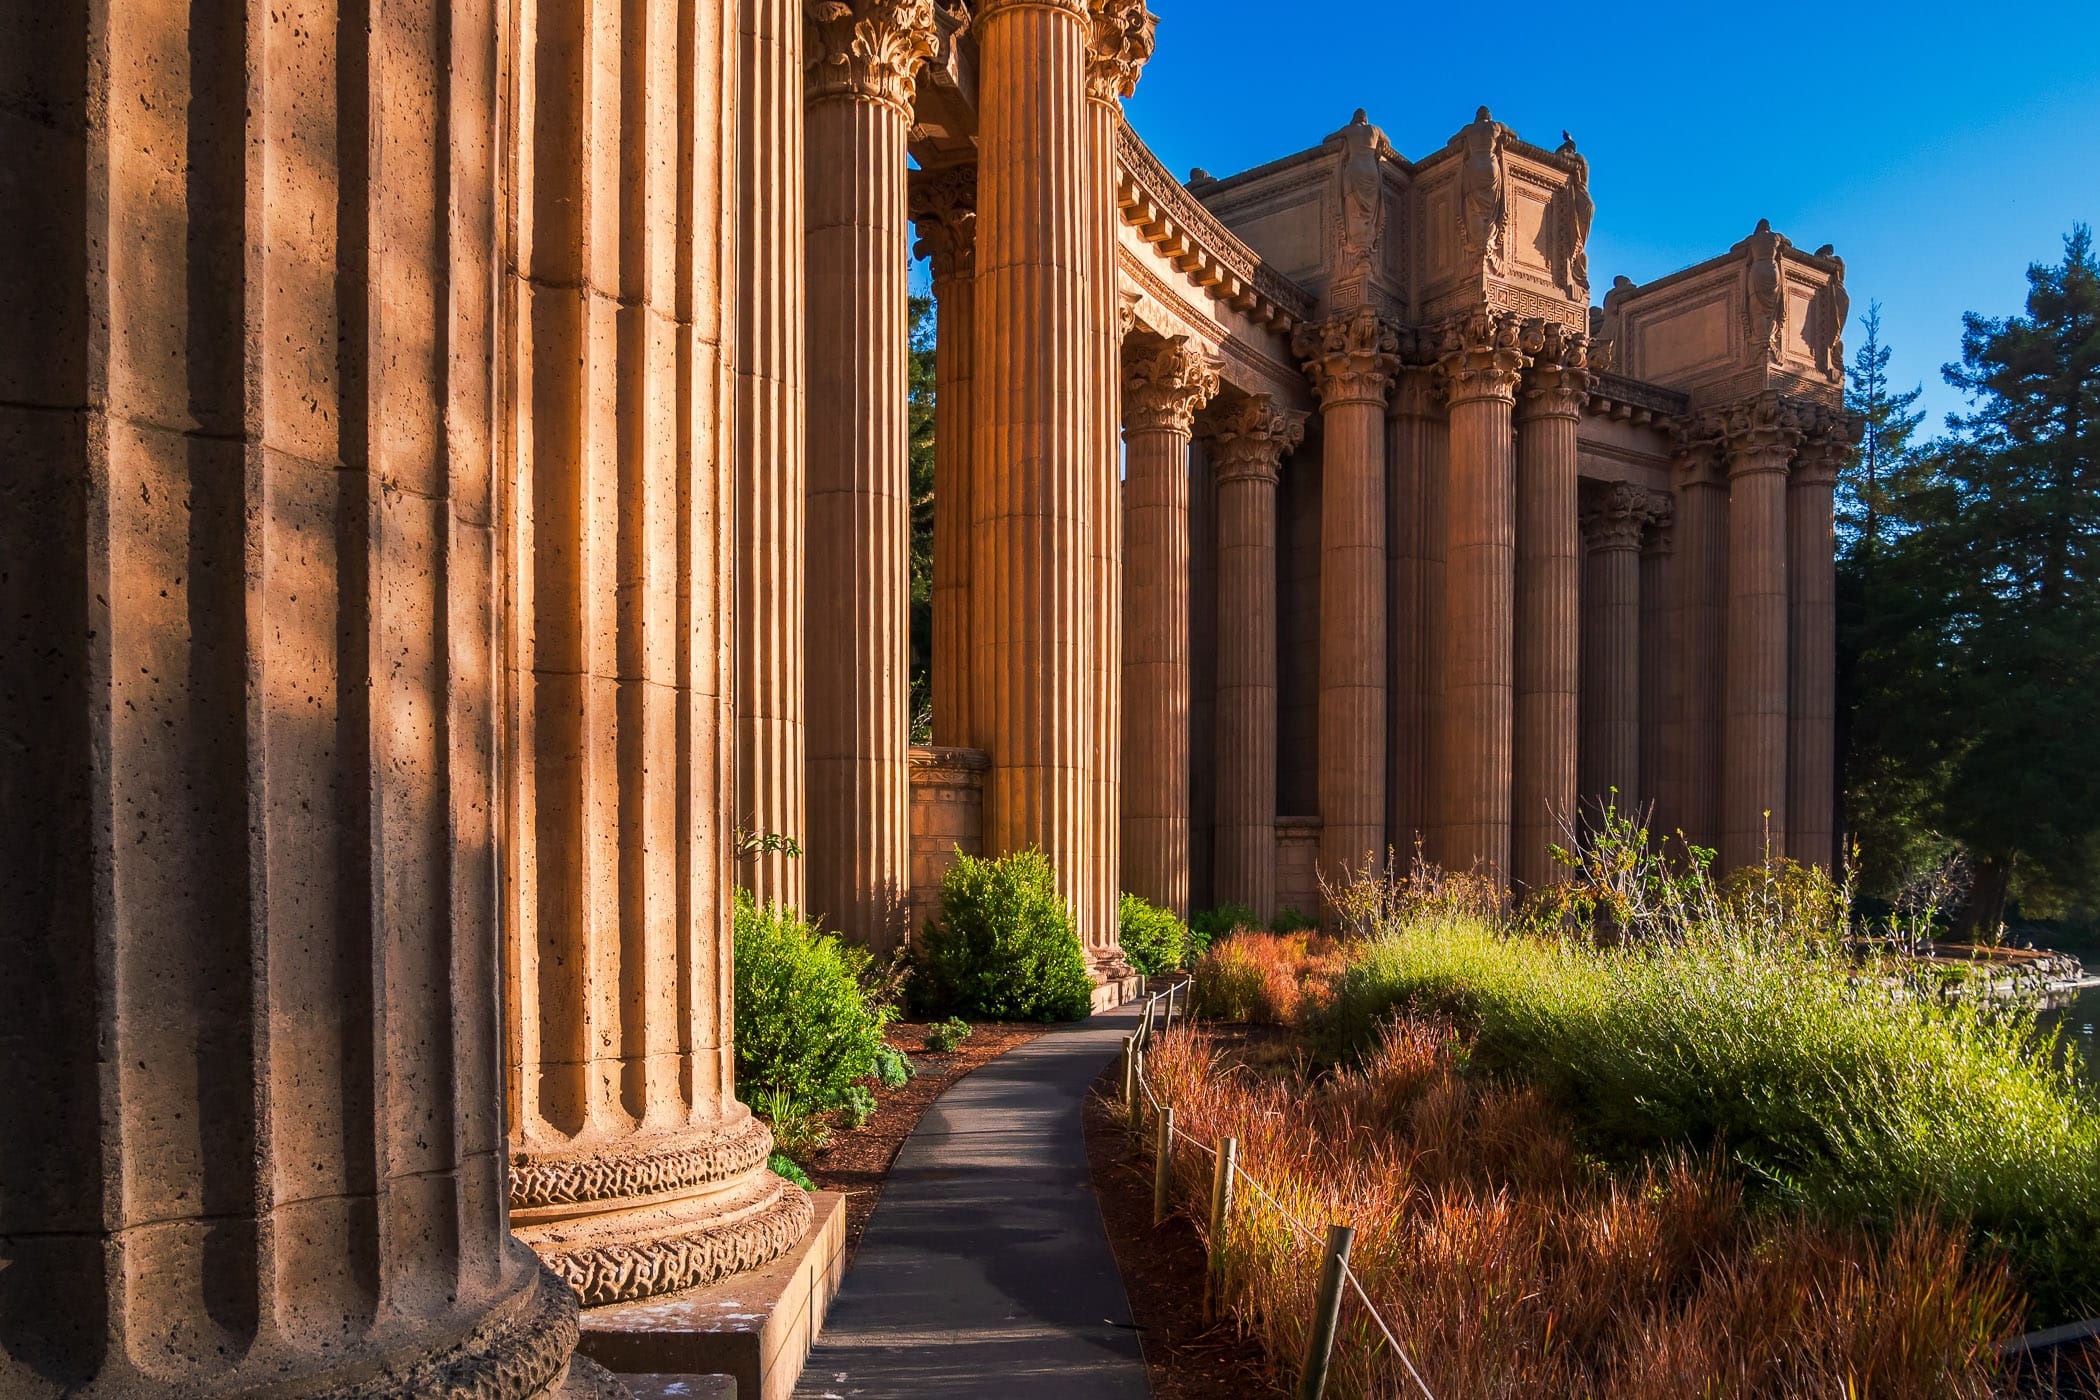 The ornate columns of San Francisco's Palace of Fine Arts.